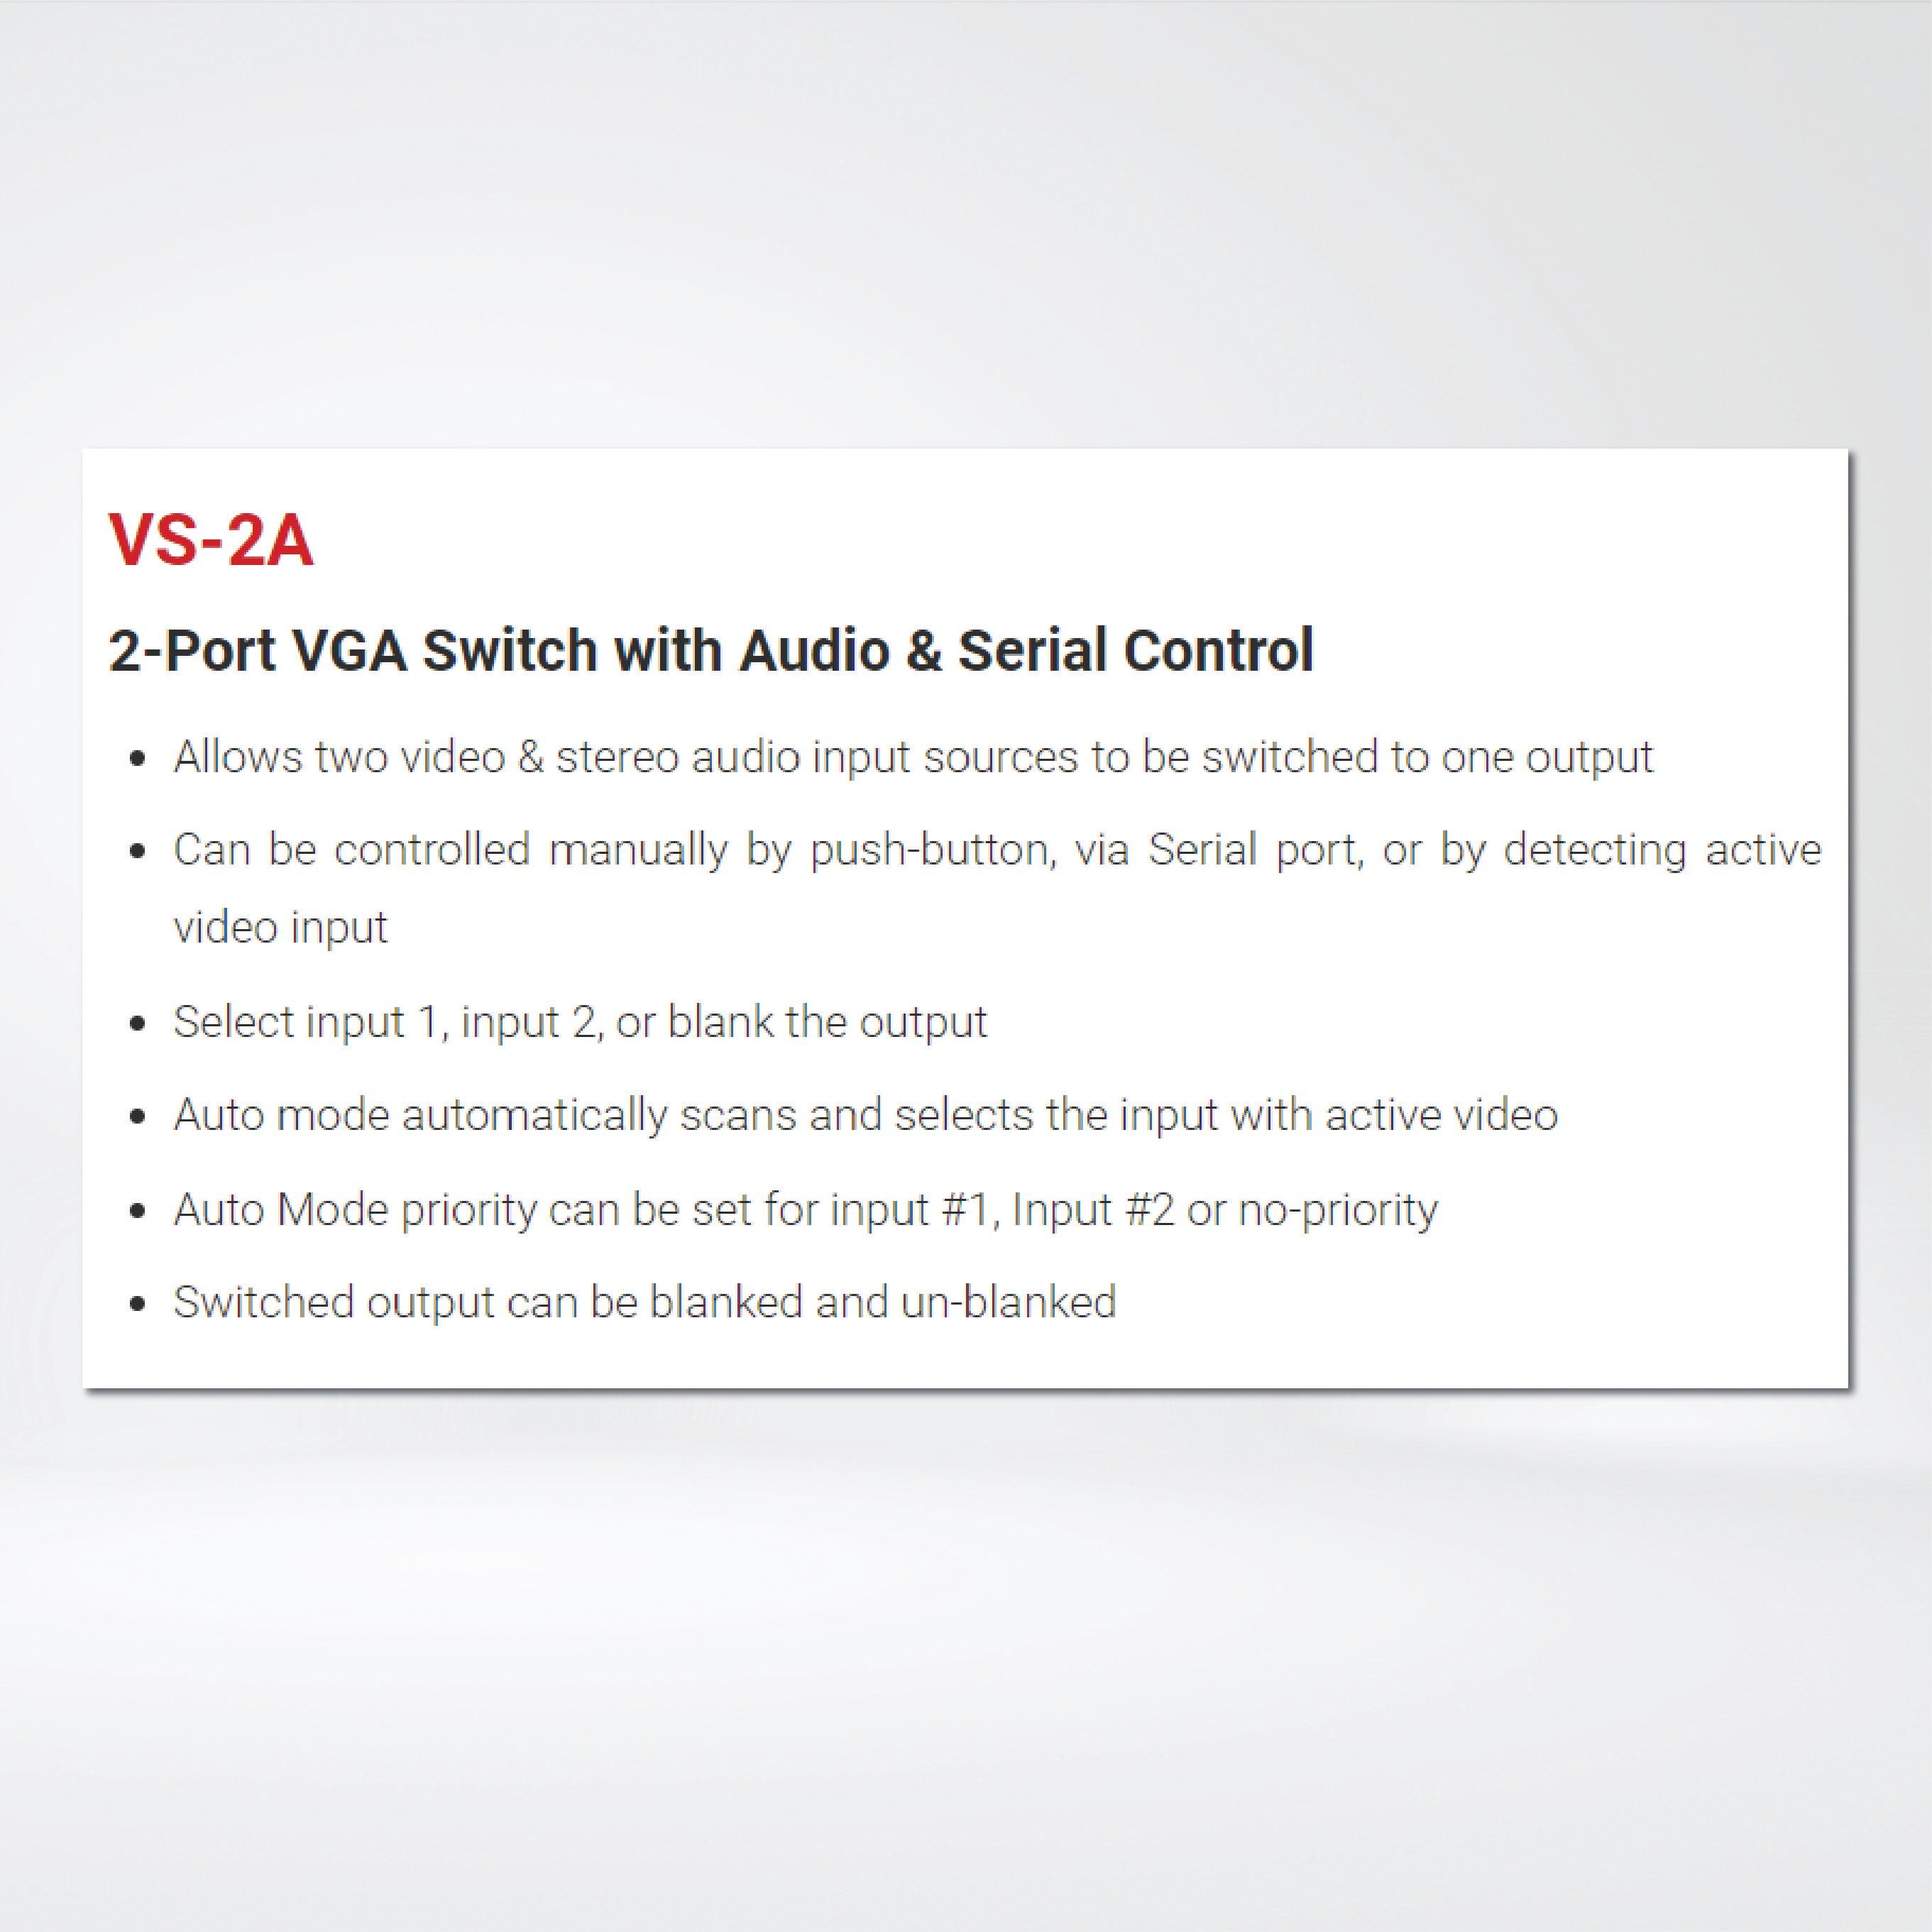 VS-2A 2-Port VGA Switch with Audio & Serial Control - Riverplus